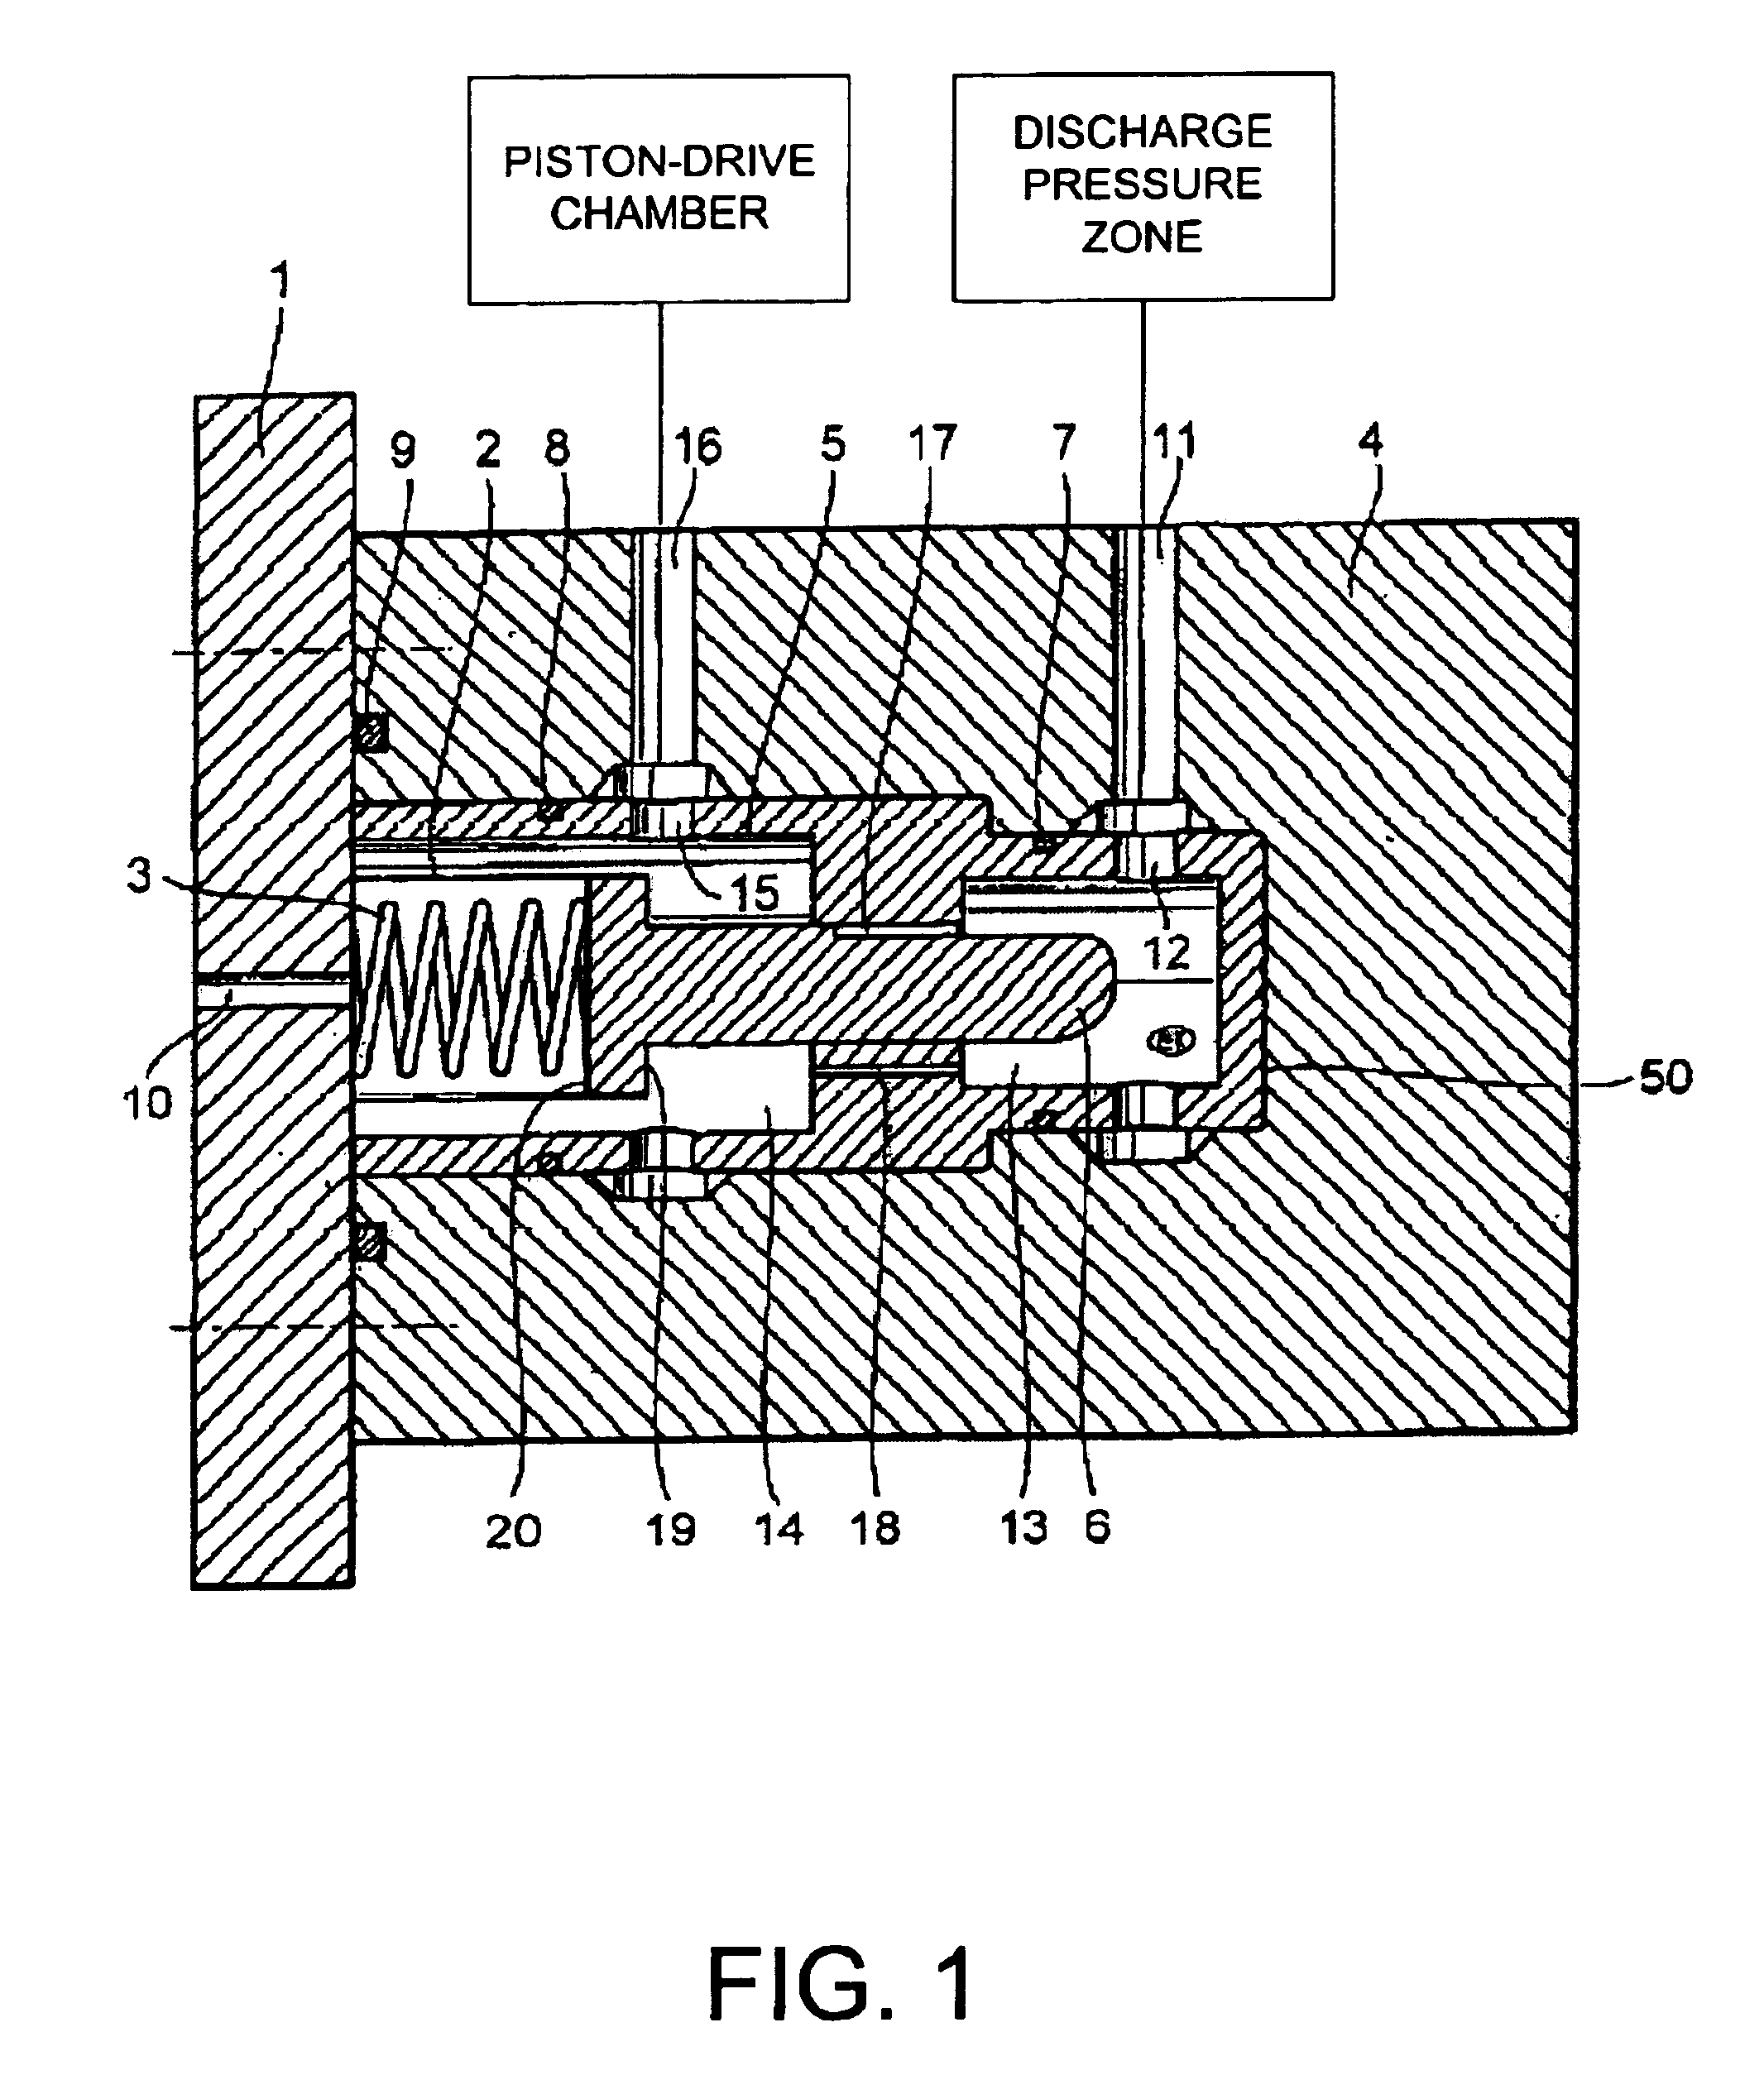 Safety device to limit pressure in an axial-piston compressor housing